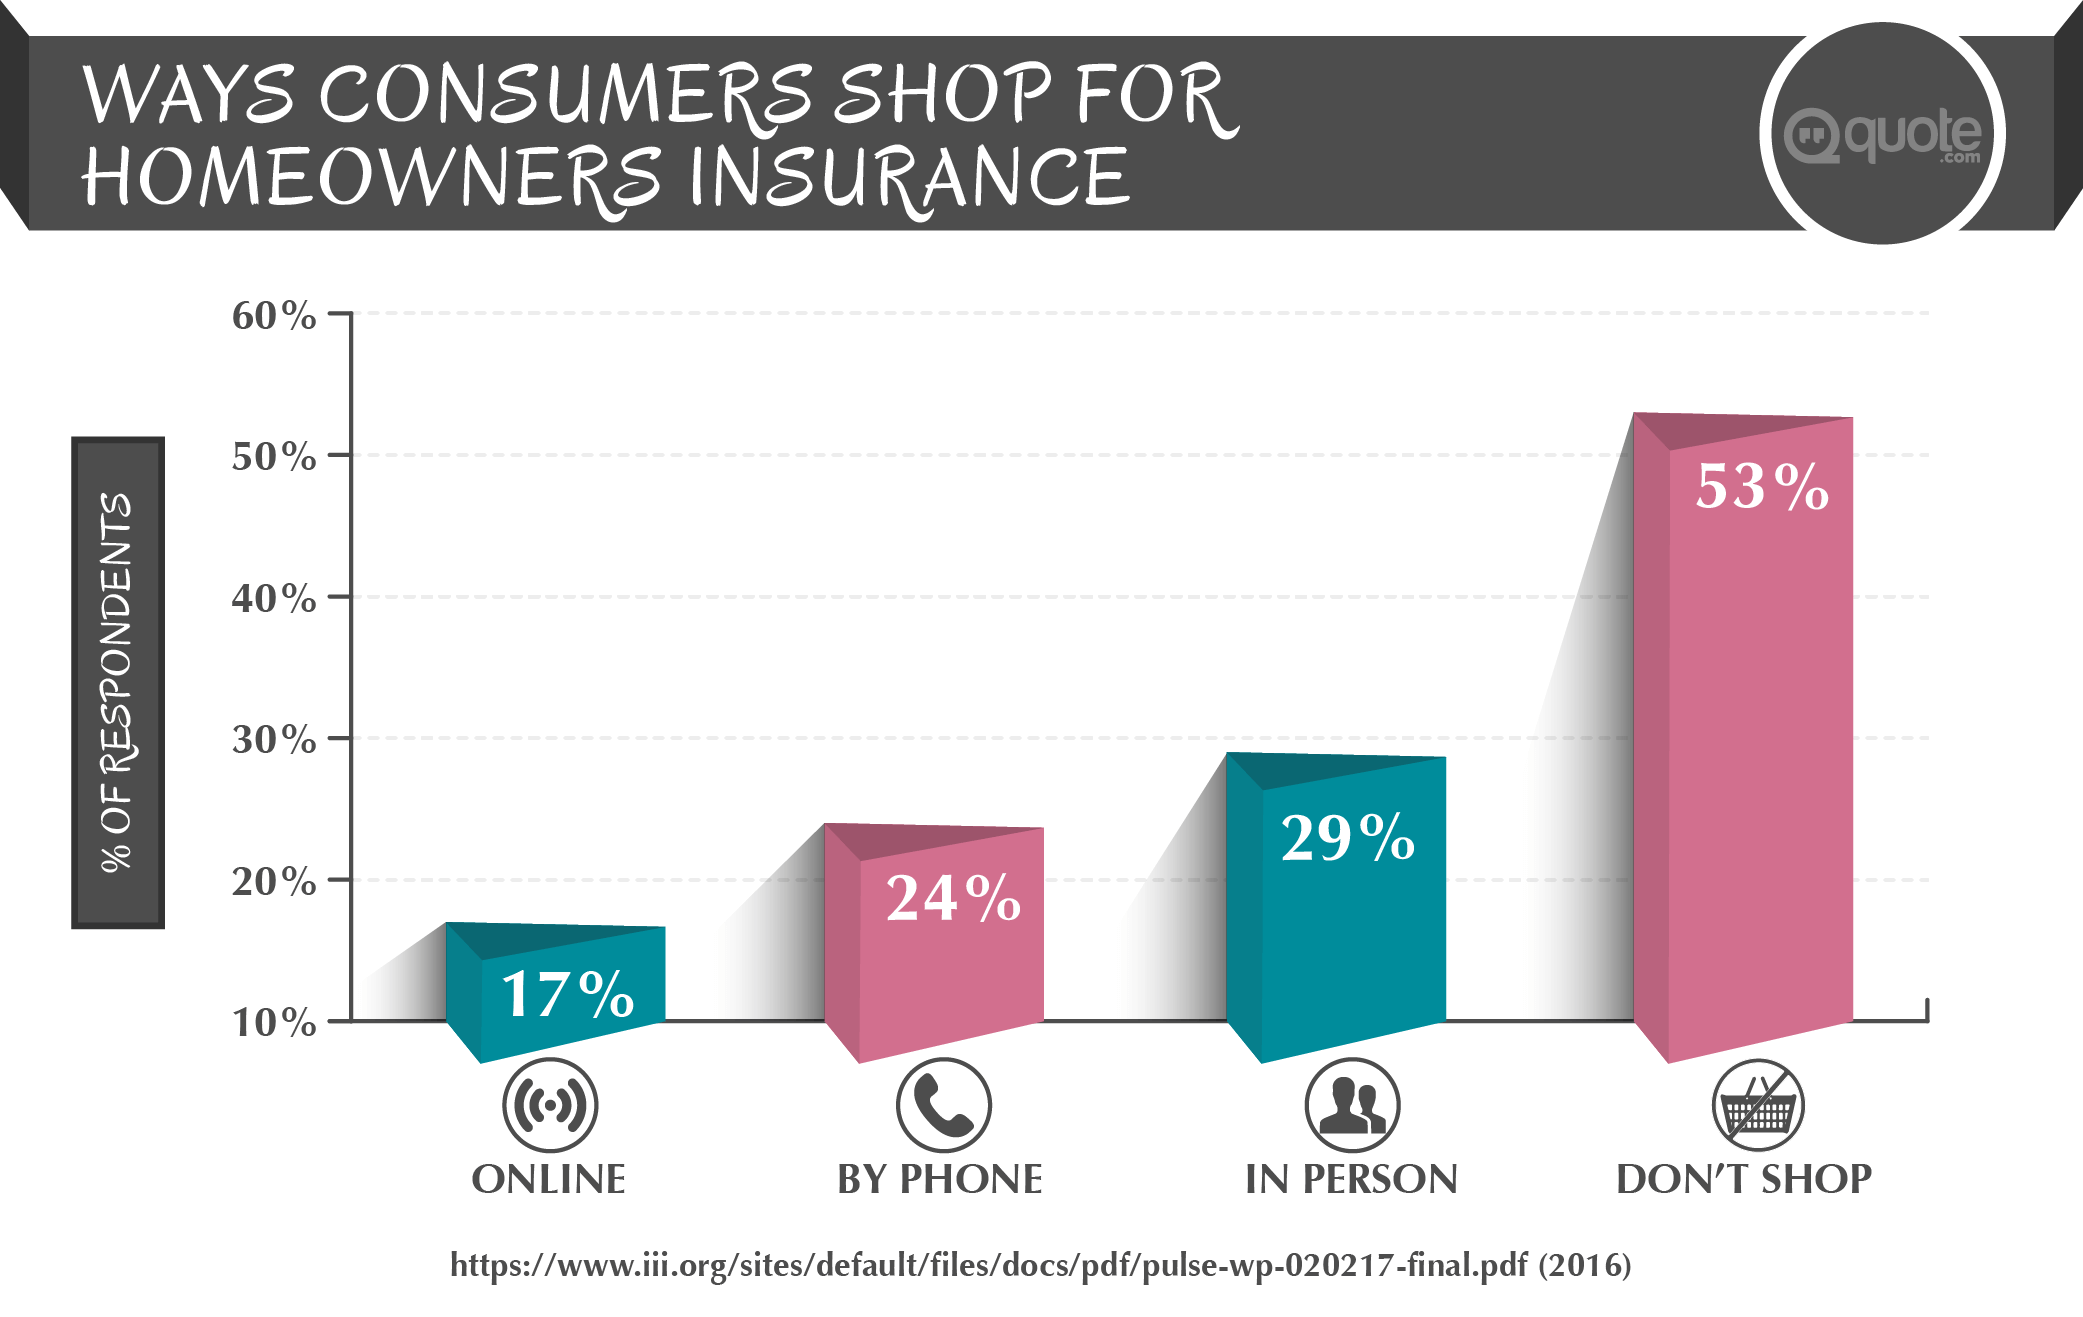 Ways Consumers Shop For Homeowners Insurance